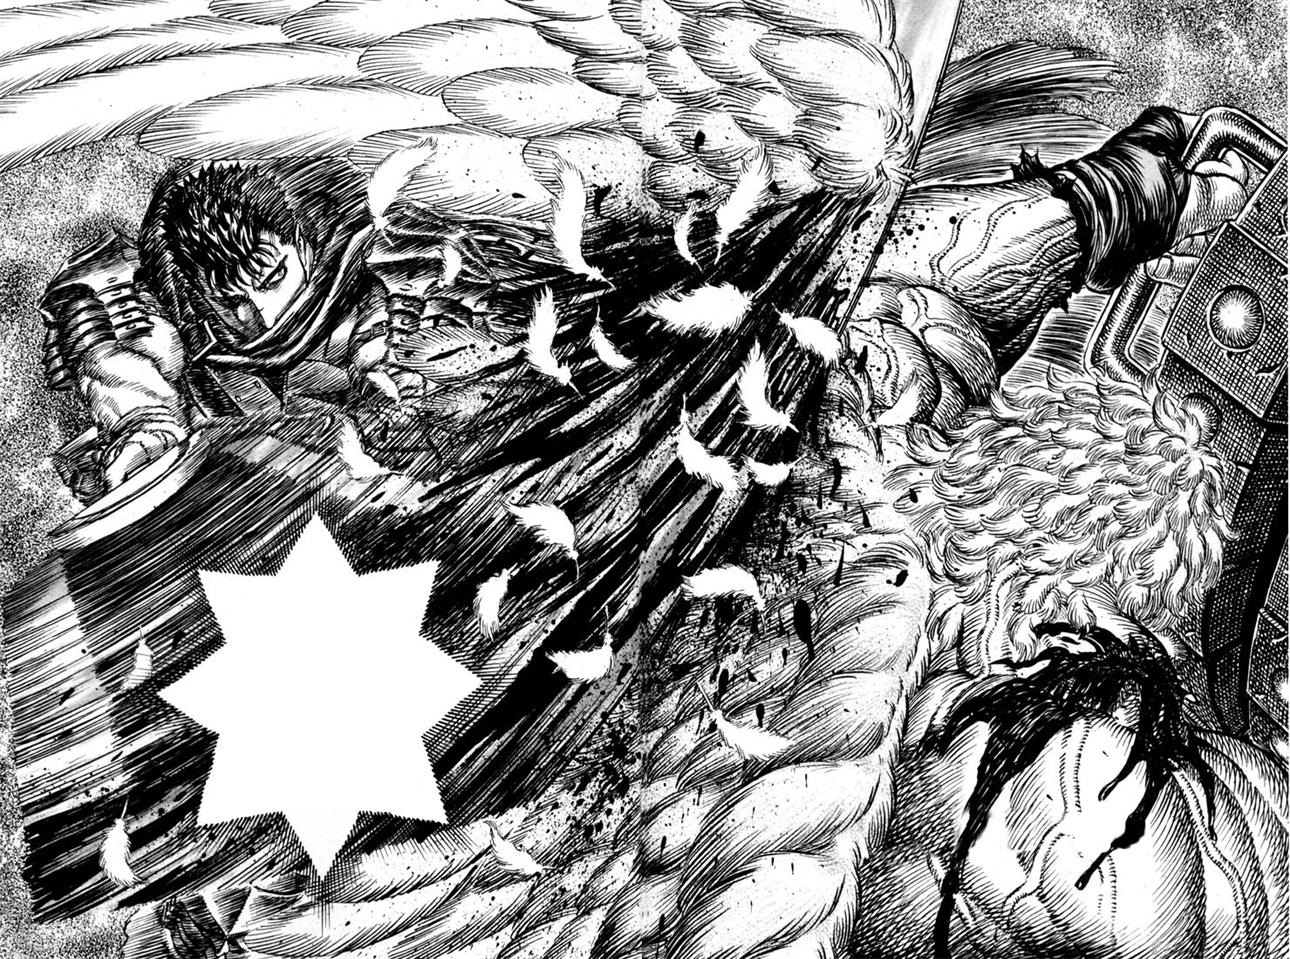 Difference Between Berserk Anime and Manga [Part 1] — Eightify